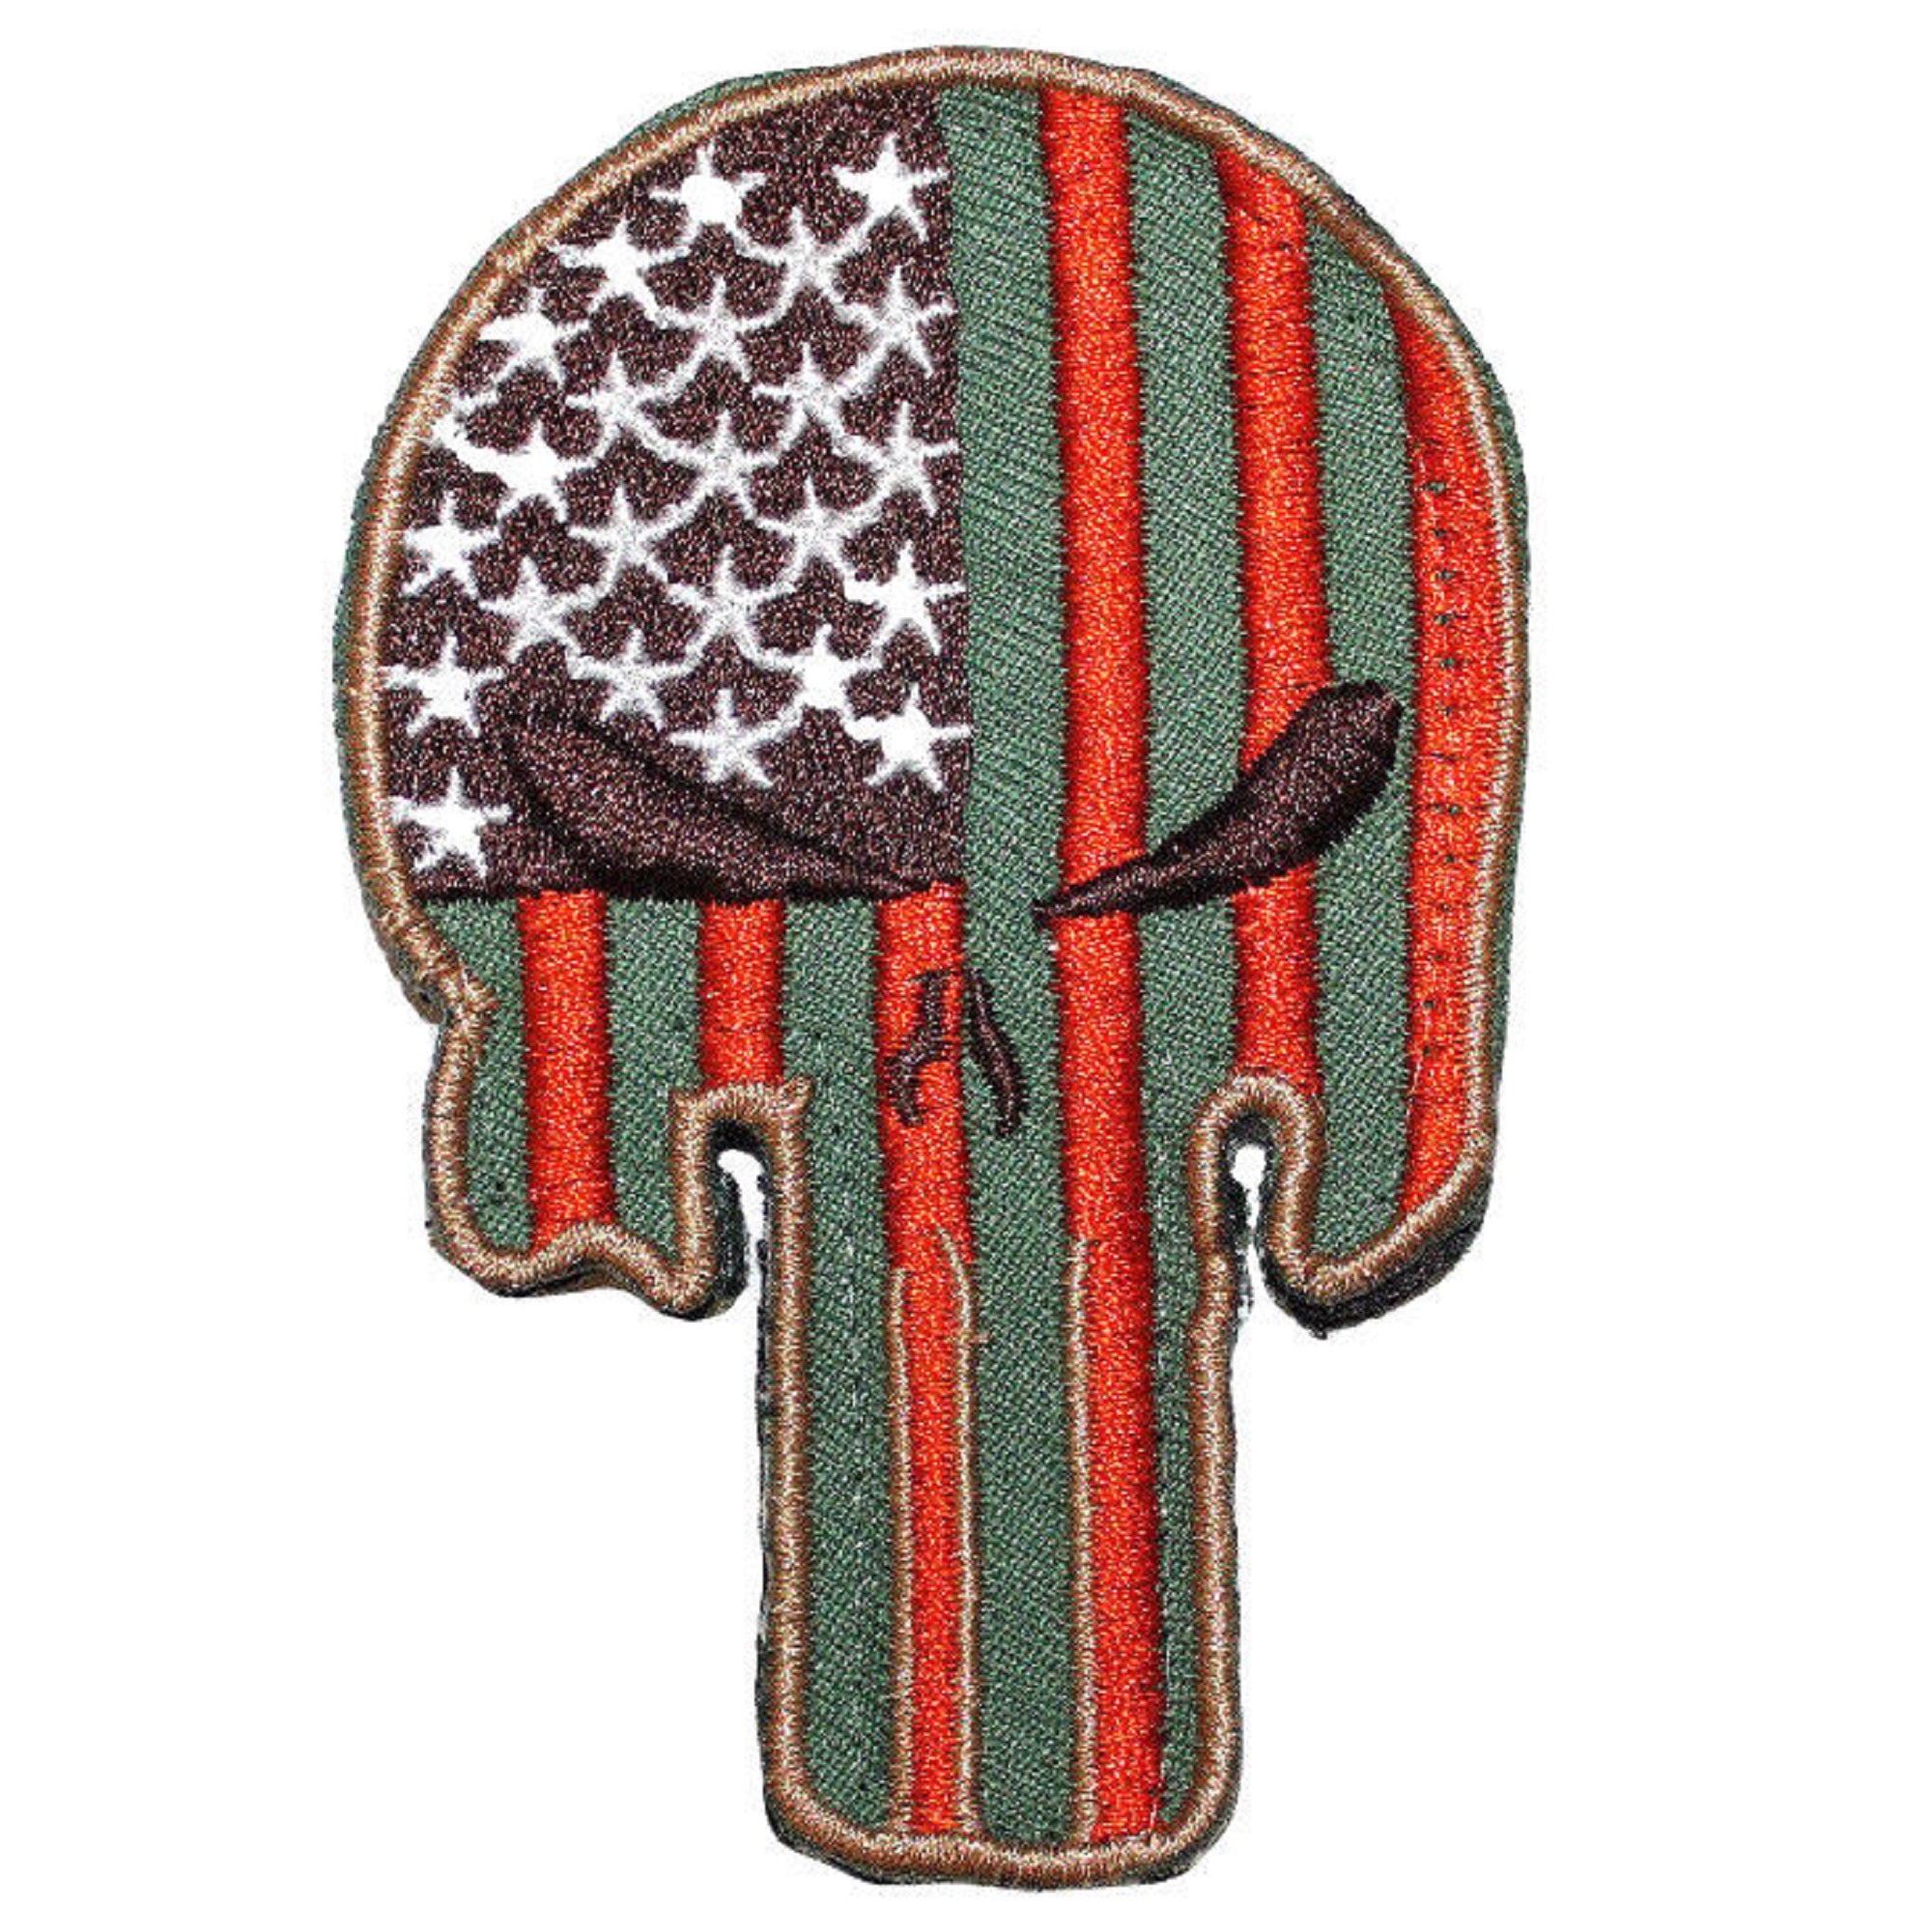 Patch Embroidered Military Tactical Army Flag Cobra Skull